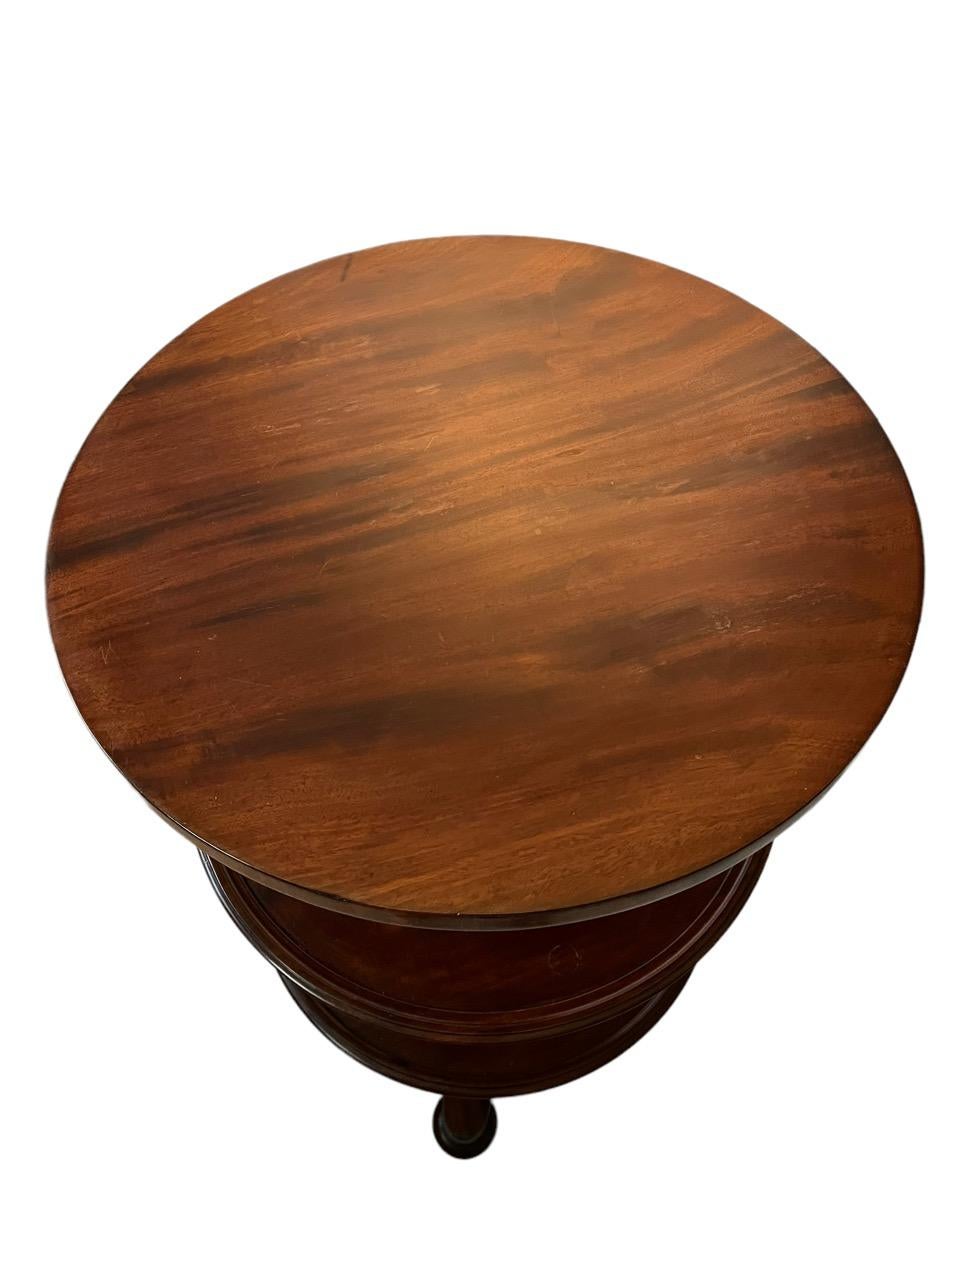 18th Century English Mahogany Expandable Round Three Tier Dumbwaiter Table For Sale 9